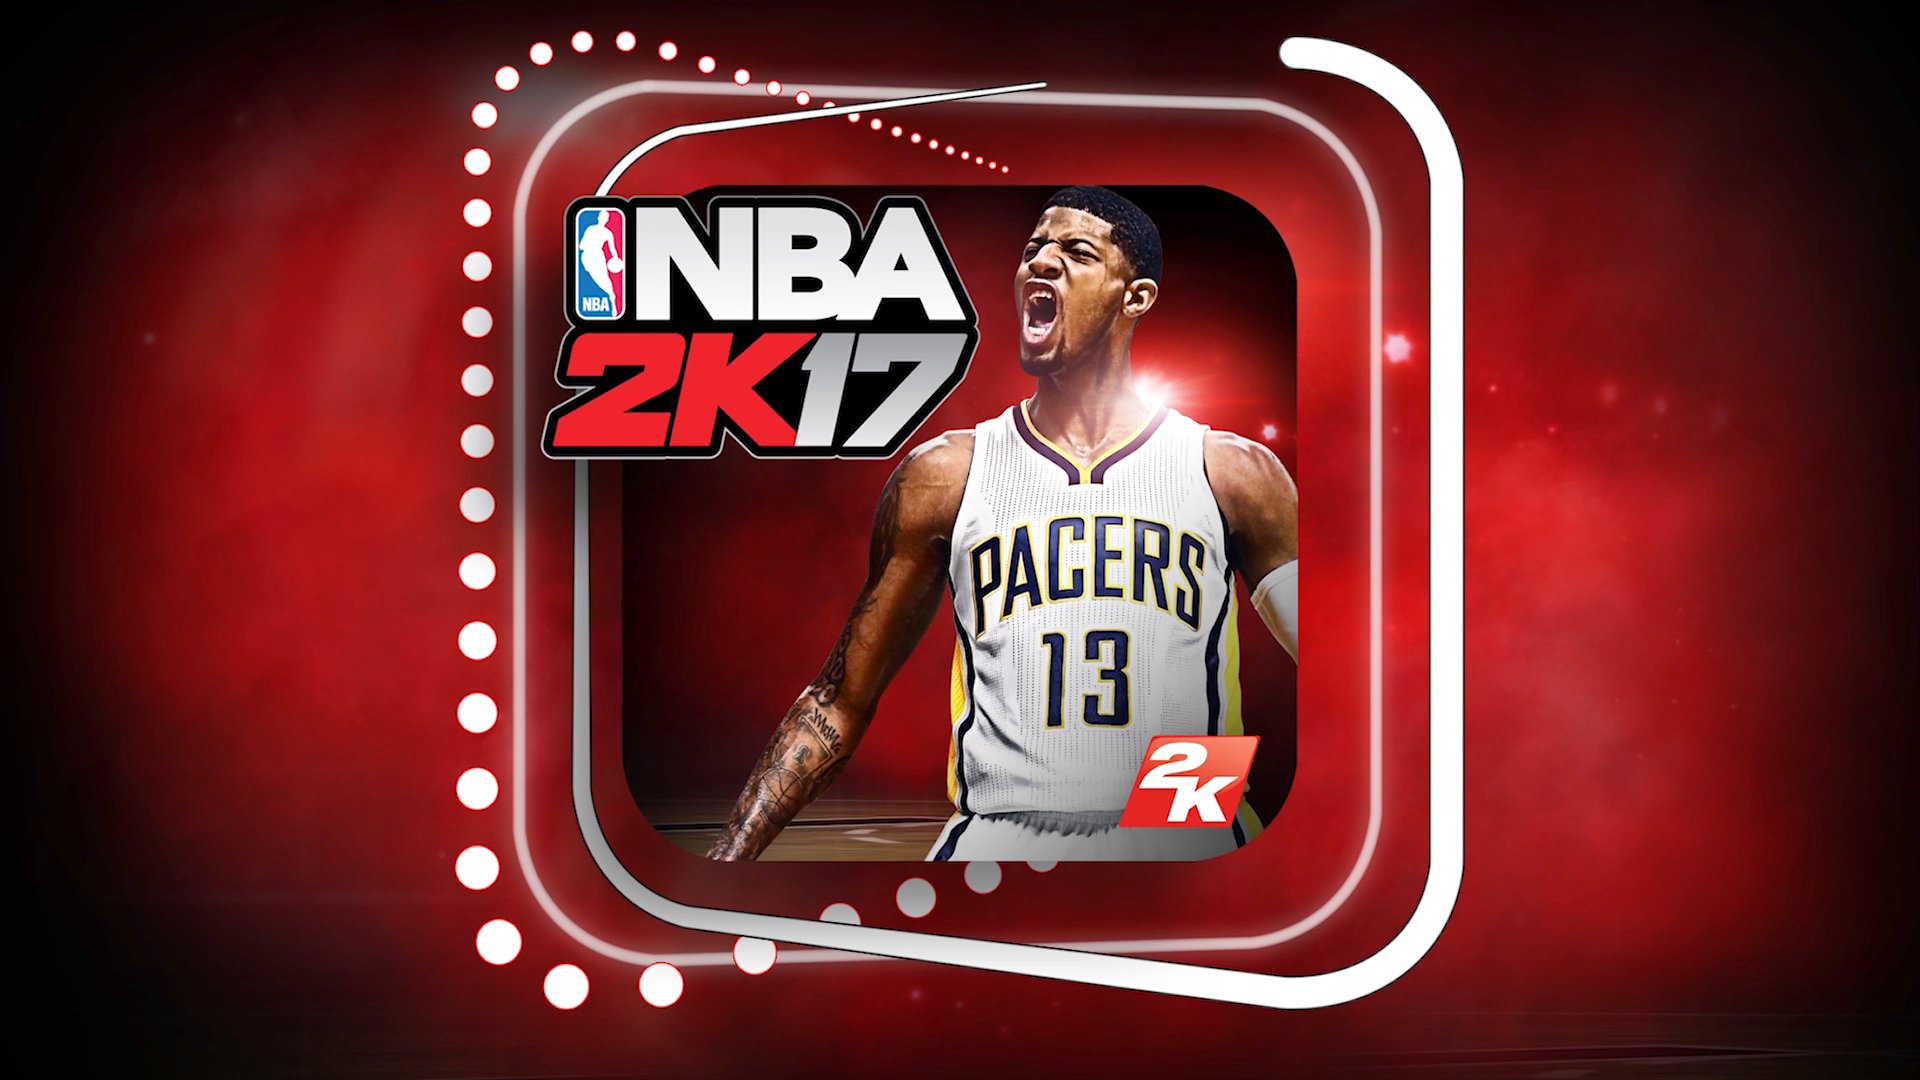 How To Download NBA 2K17 For Free